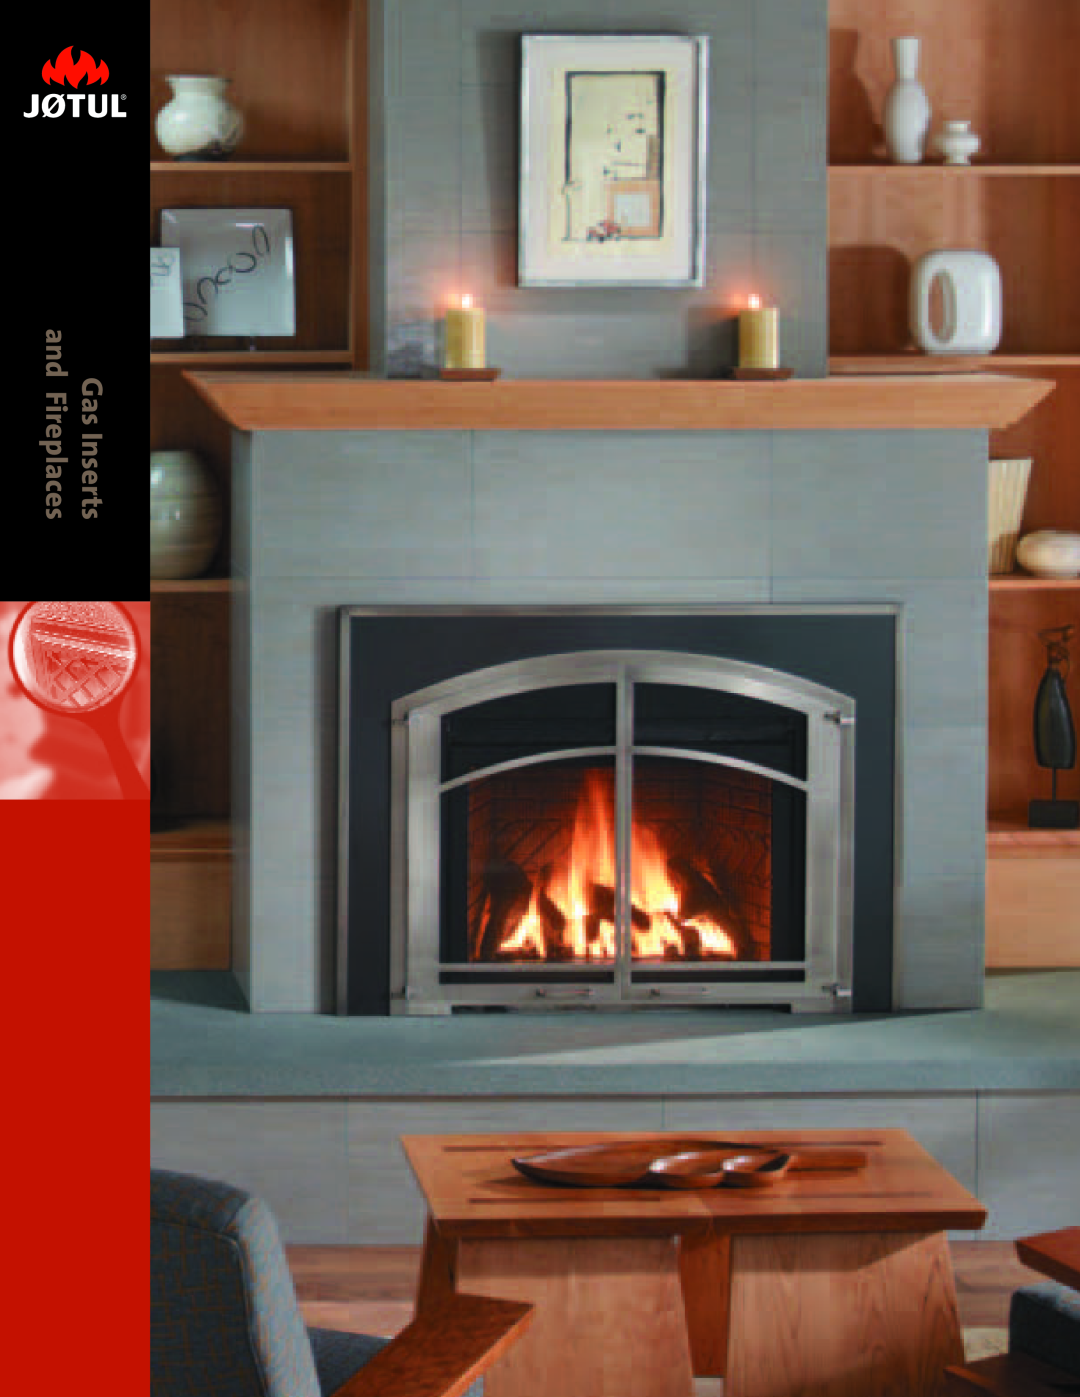 Jotul Gas Inserts and Fireplaces brochure 